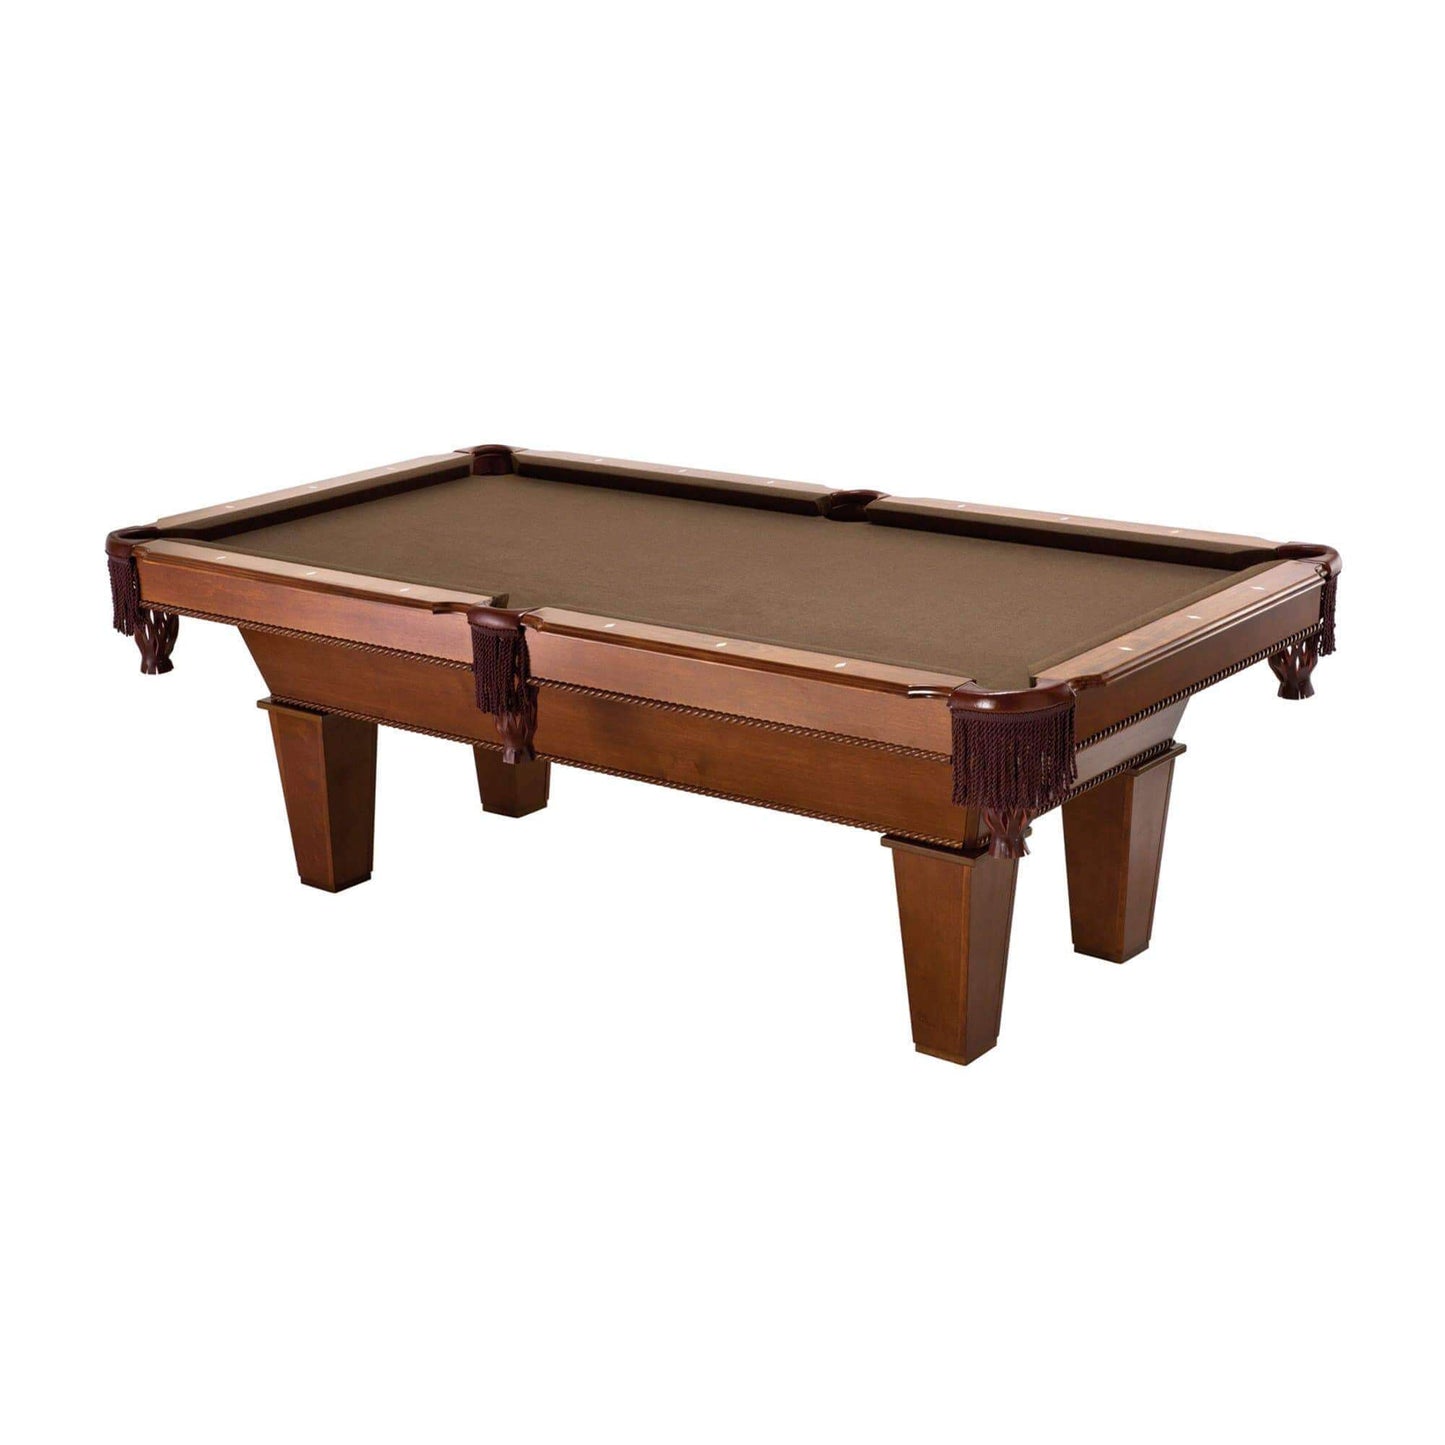 shot of the Fat Cat™ Frisco 7.5' Billiard Table with Play Package